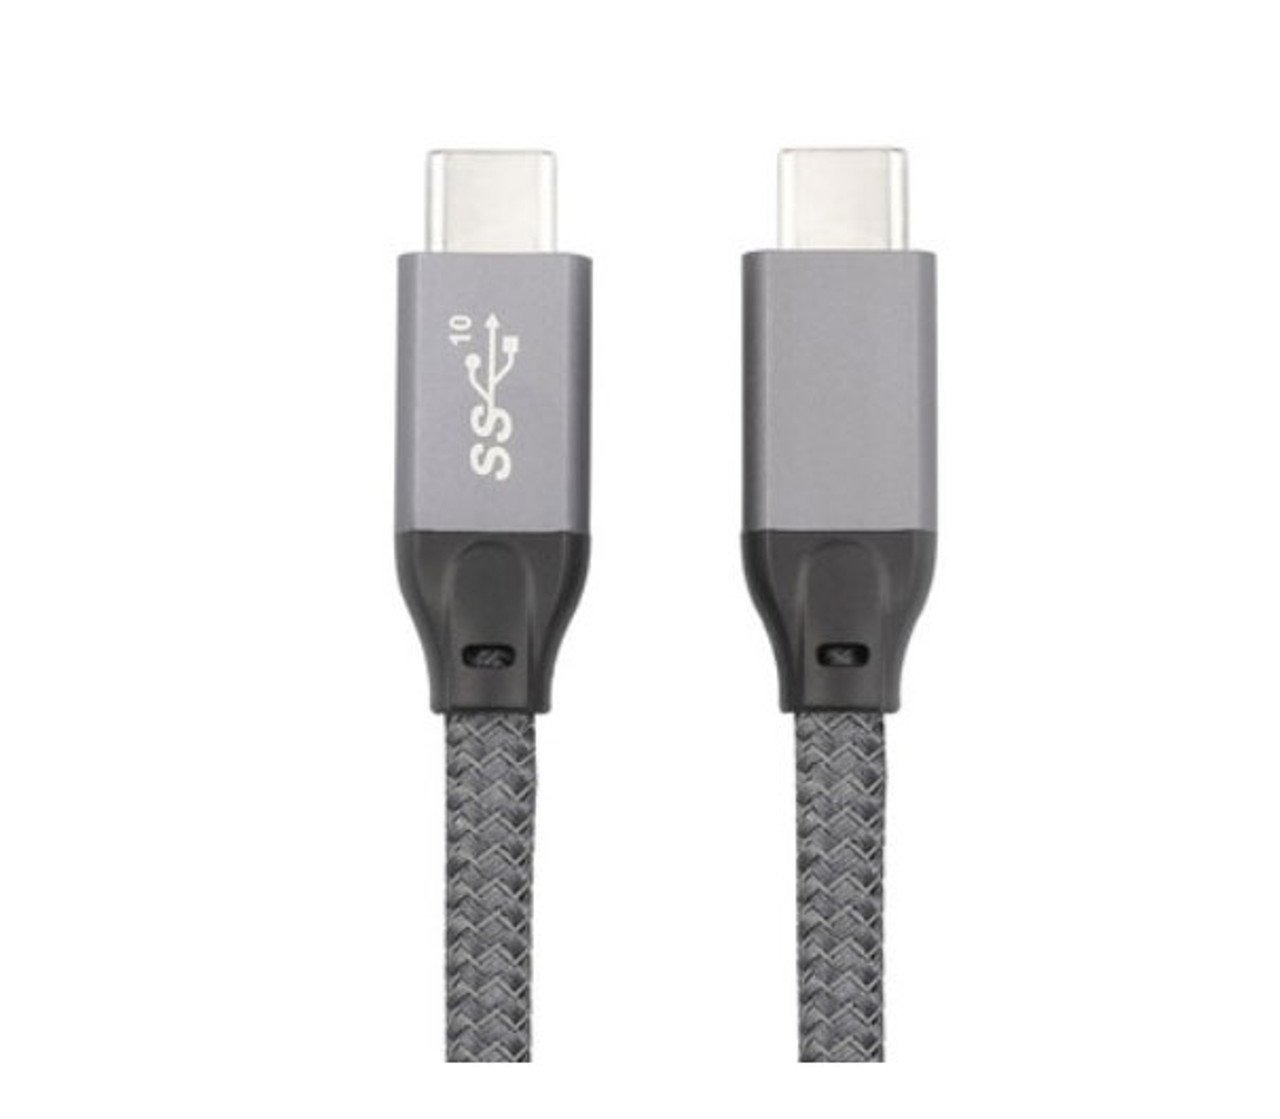 0.5M USB 3.2 ( 3.1 Gen 2 ) Type-C M/M Cable supports 10Gbps/100W